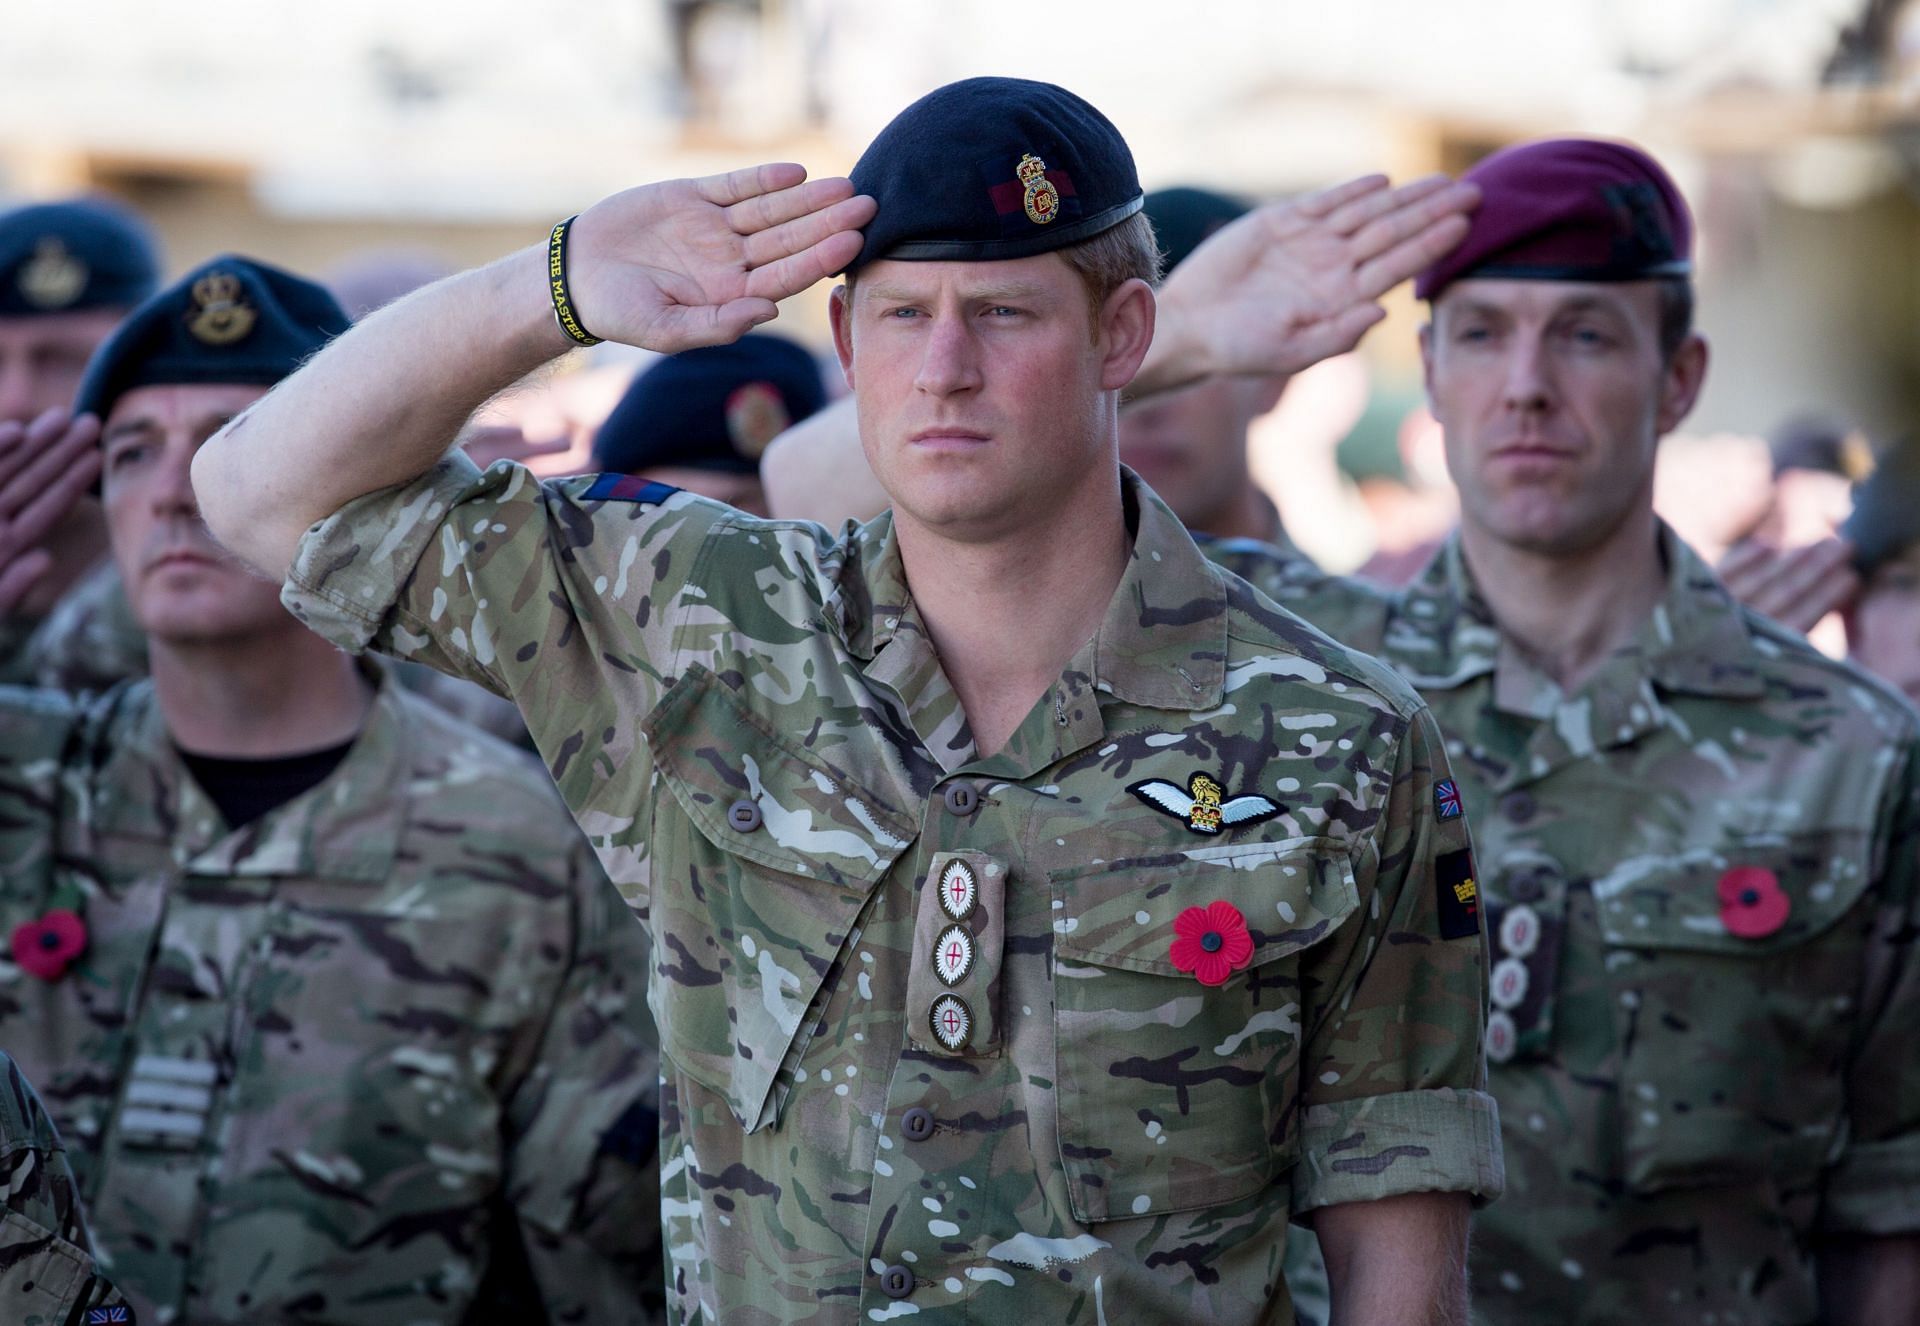 British Troops In Kandahar Participate In A Remembrance Sunday Service, 2014 (Image via Getty)